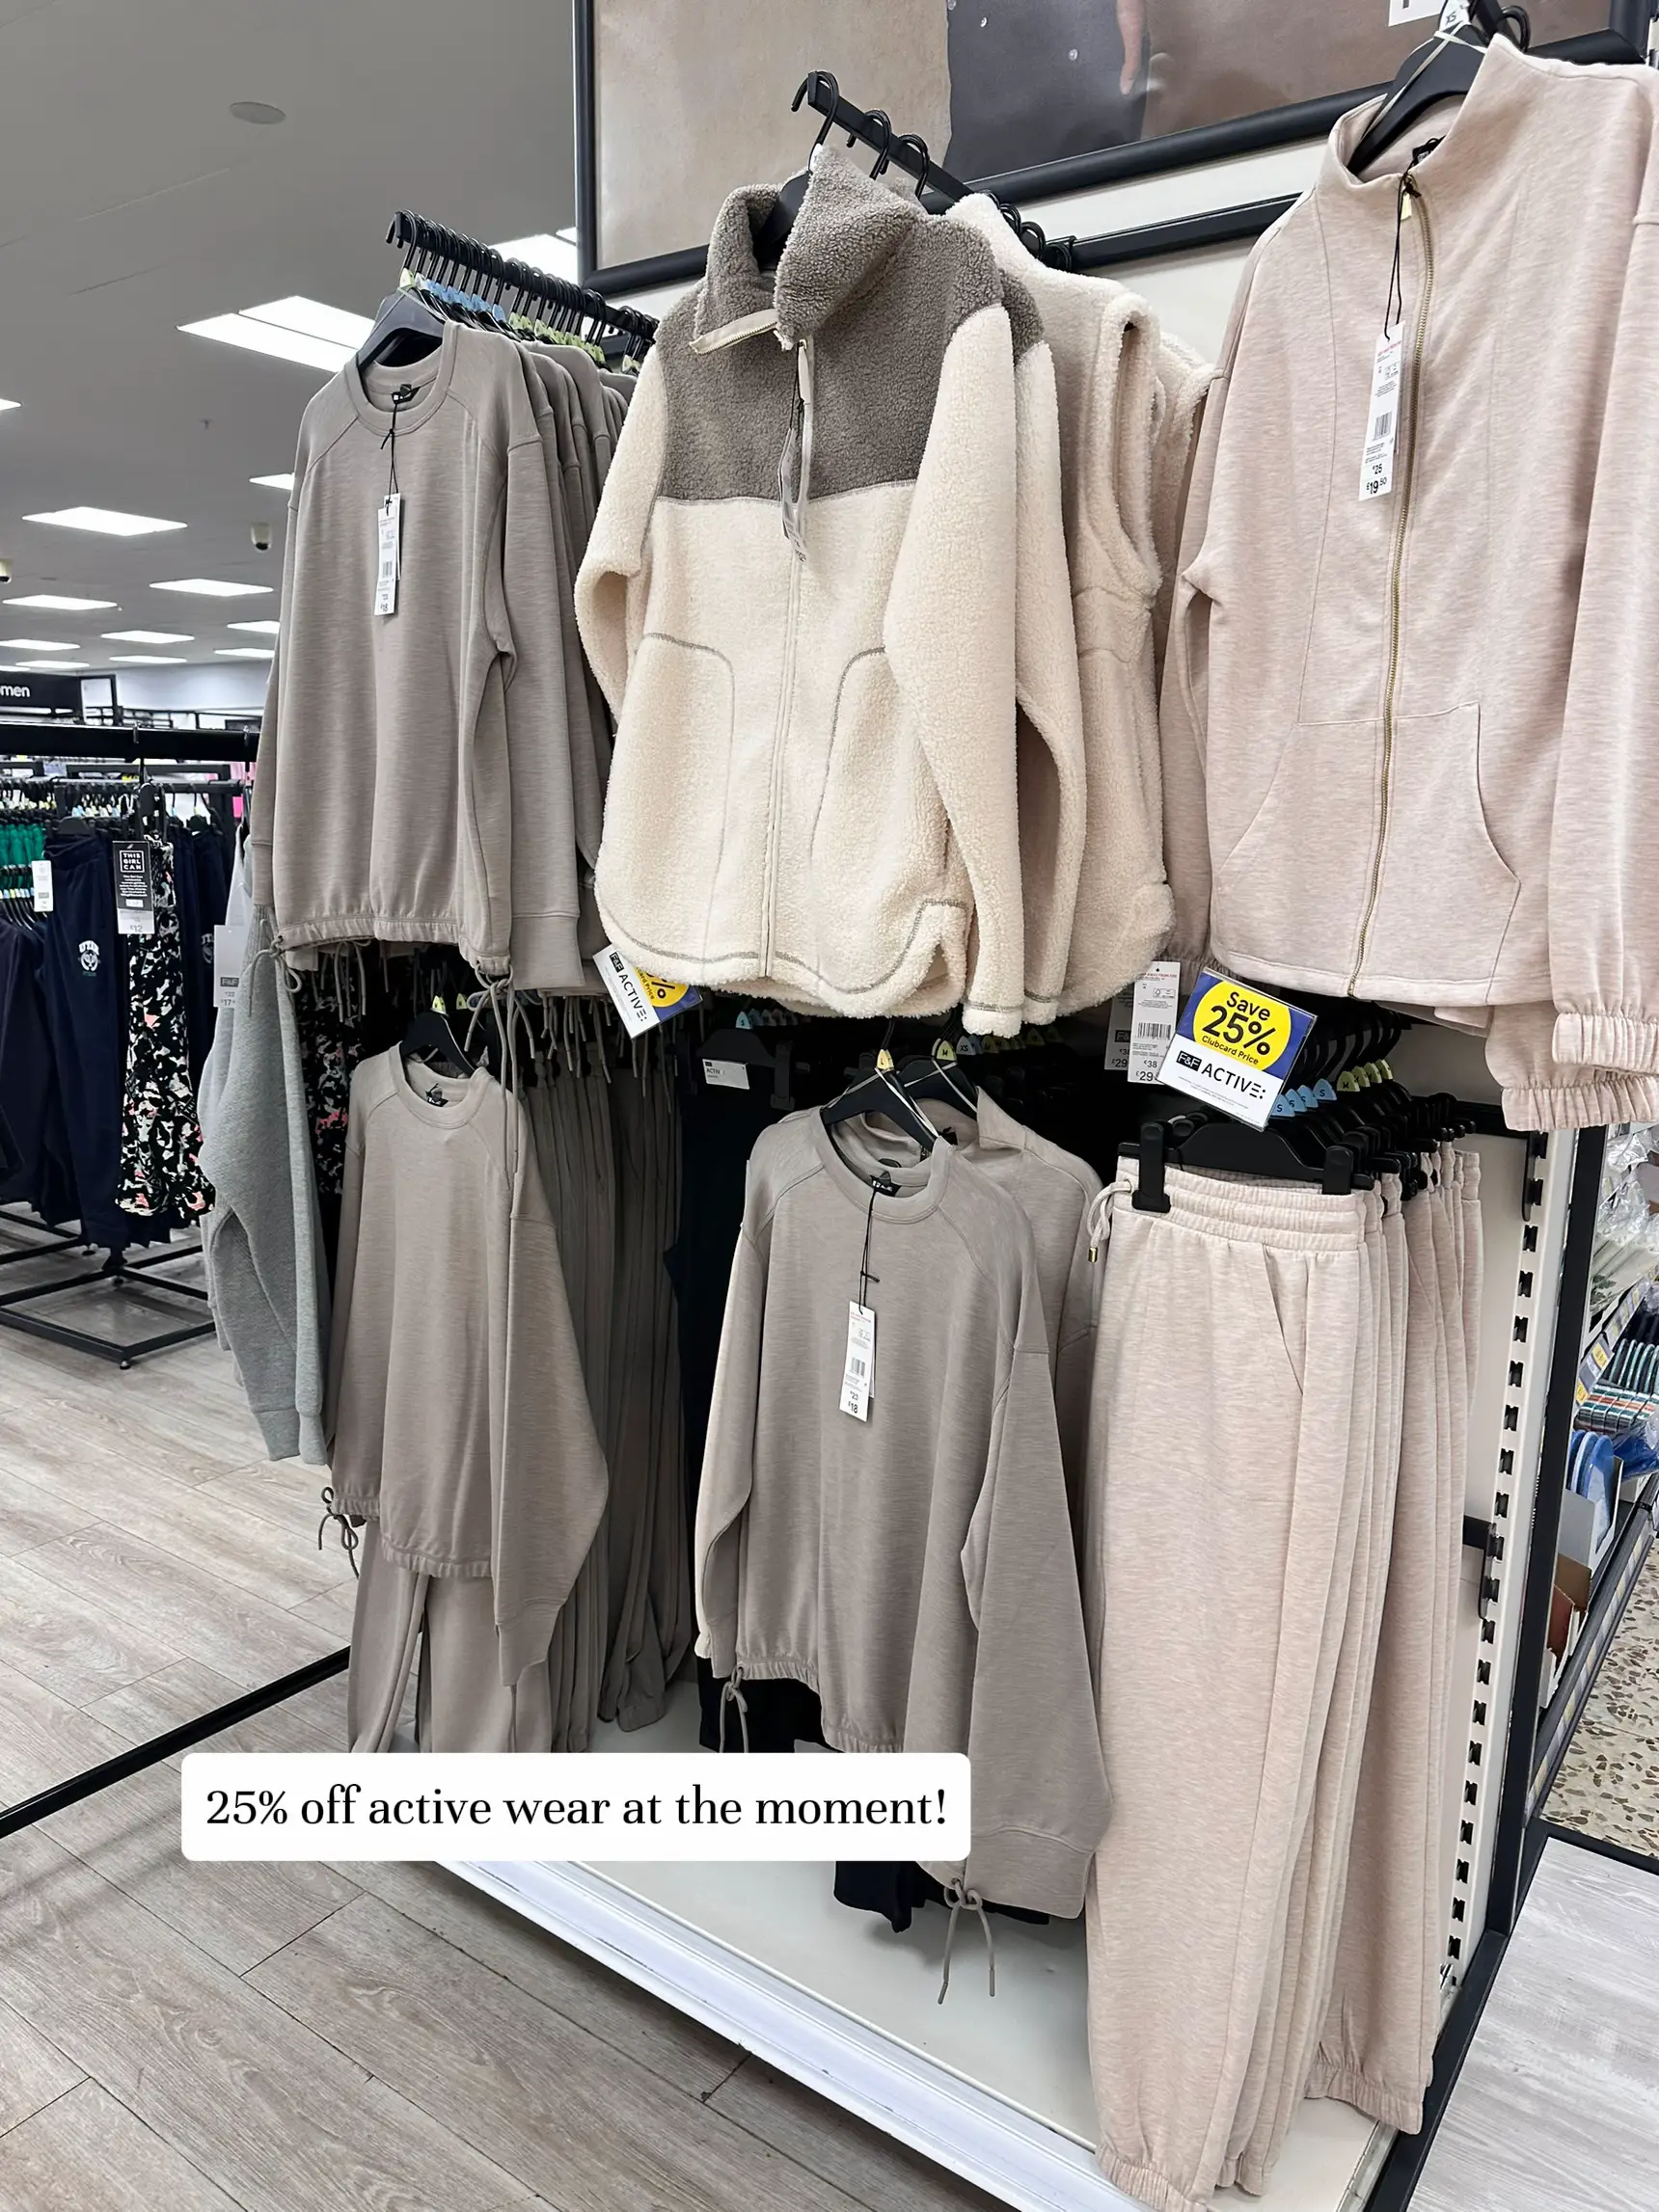 Save on your next Tesco F&F clothing shop with these discount